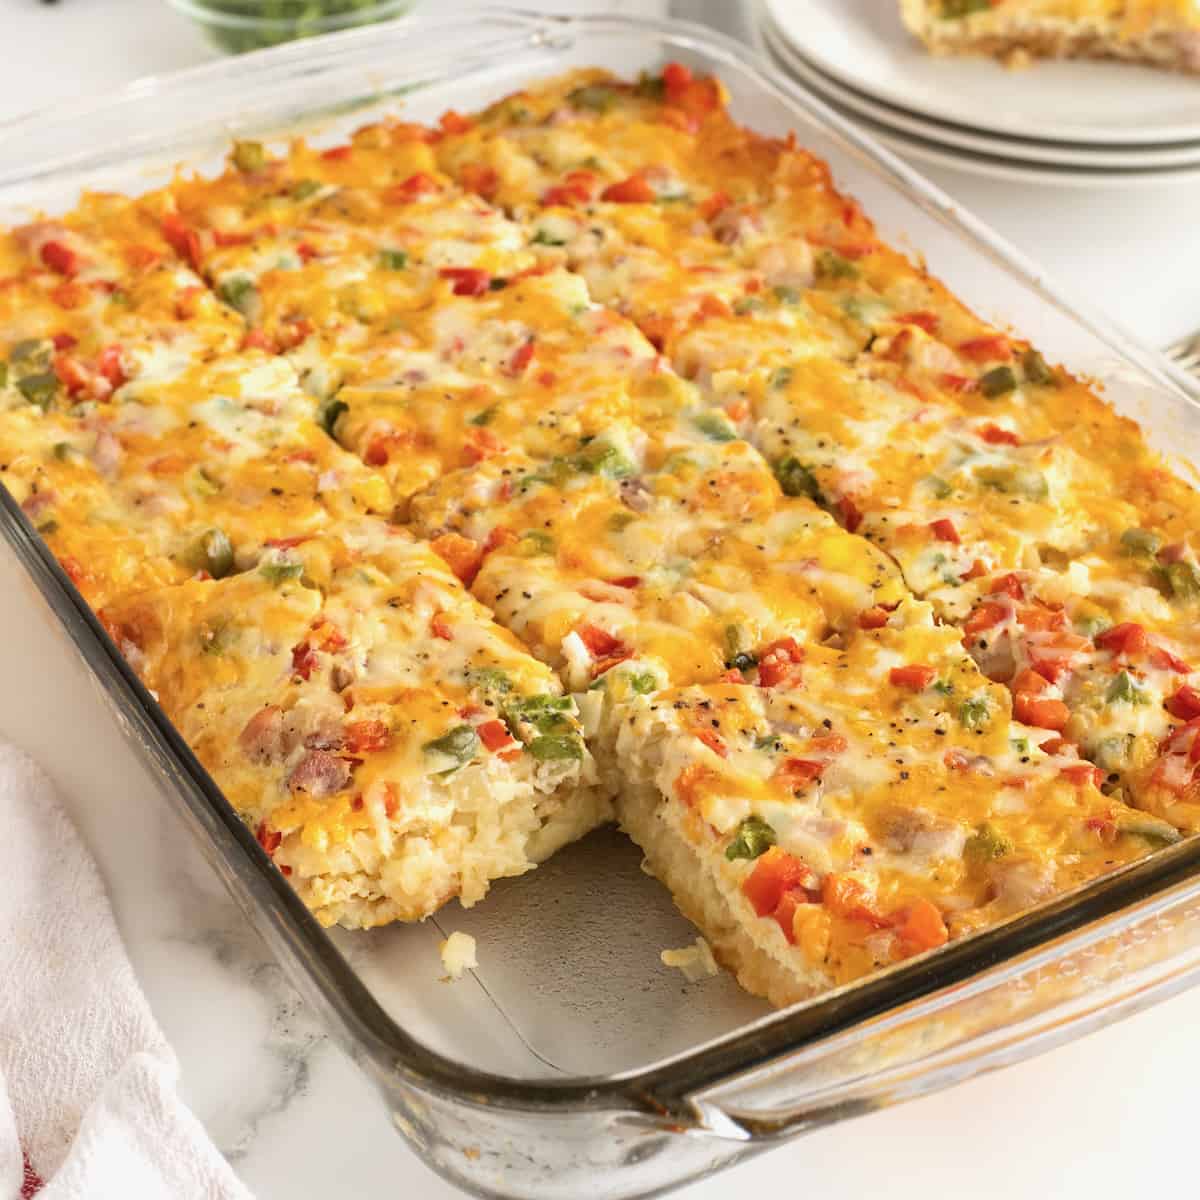 A clear glass baking dish with hash brown breakfast casserole with a slice cut out.